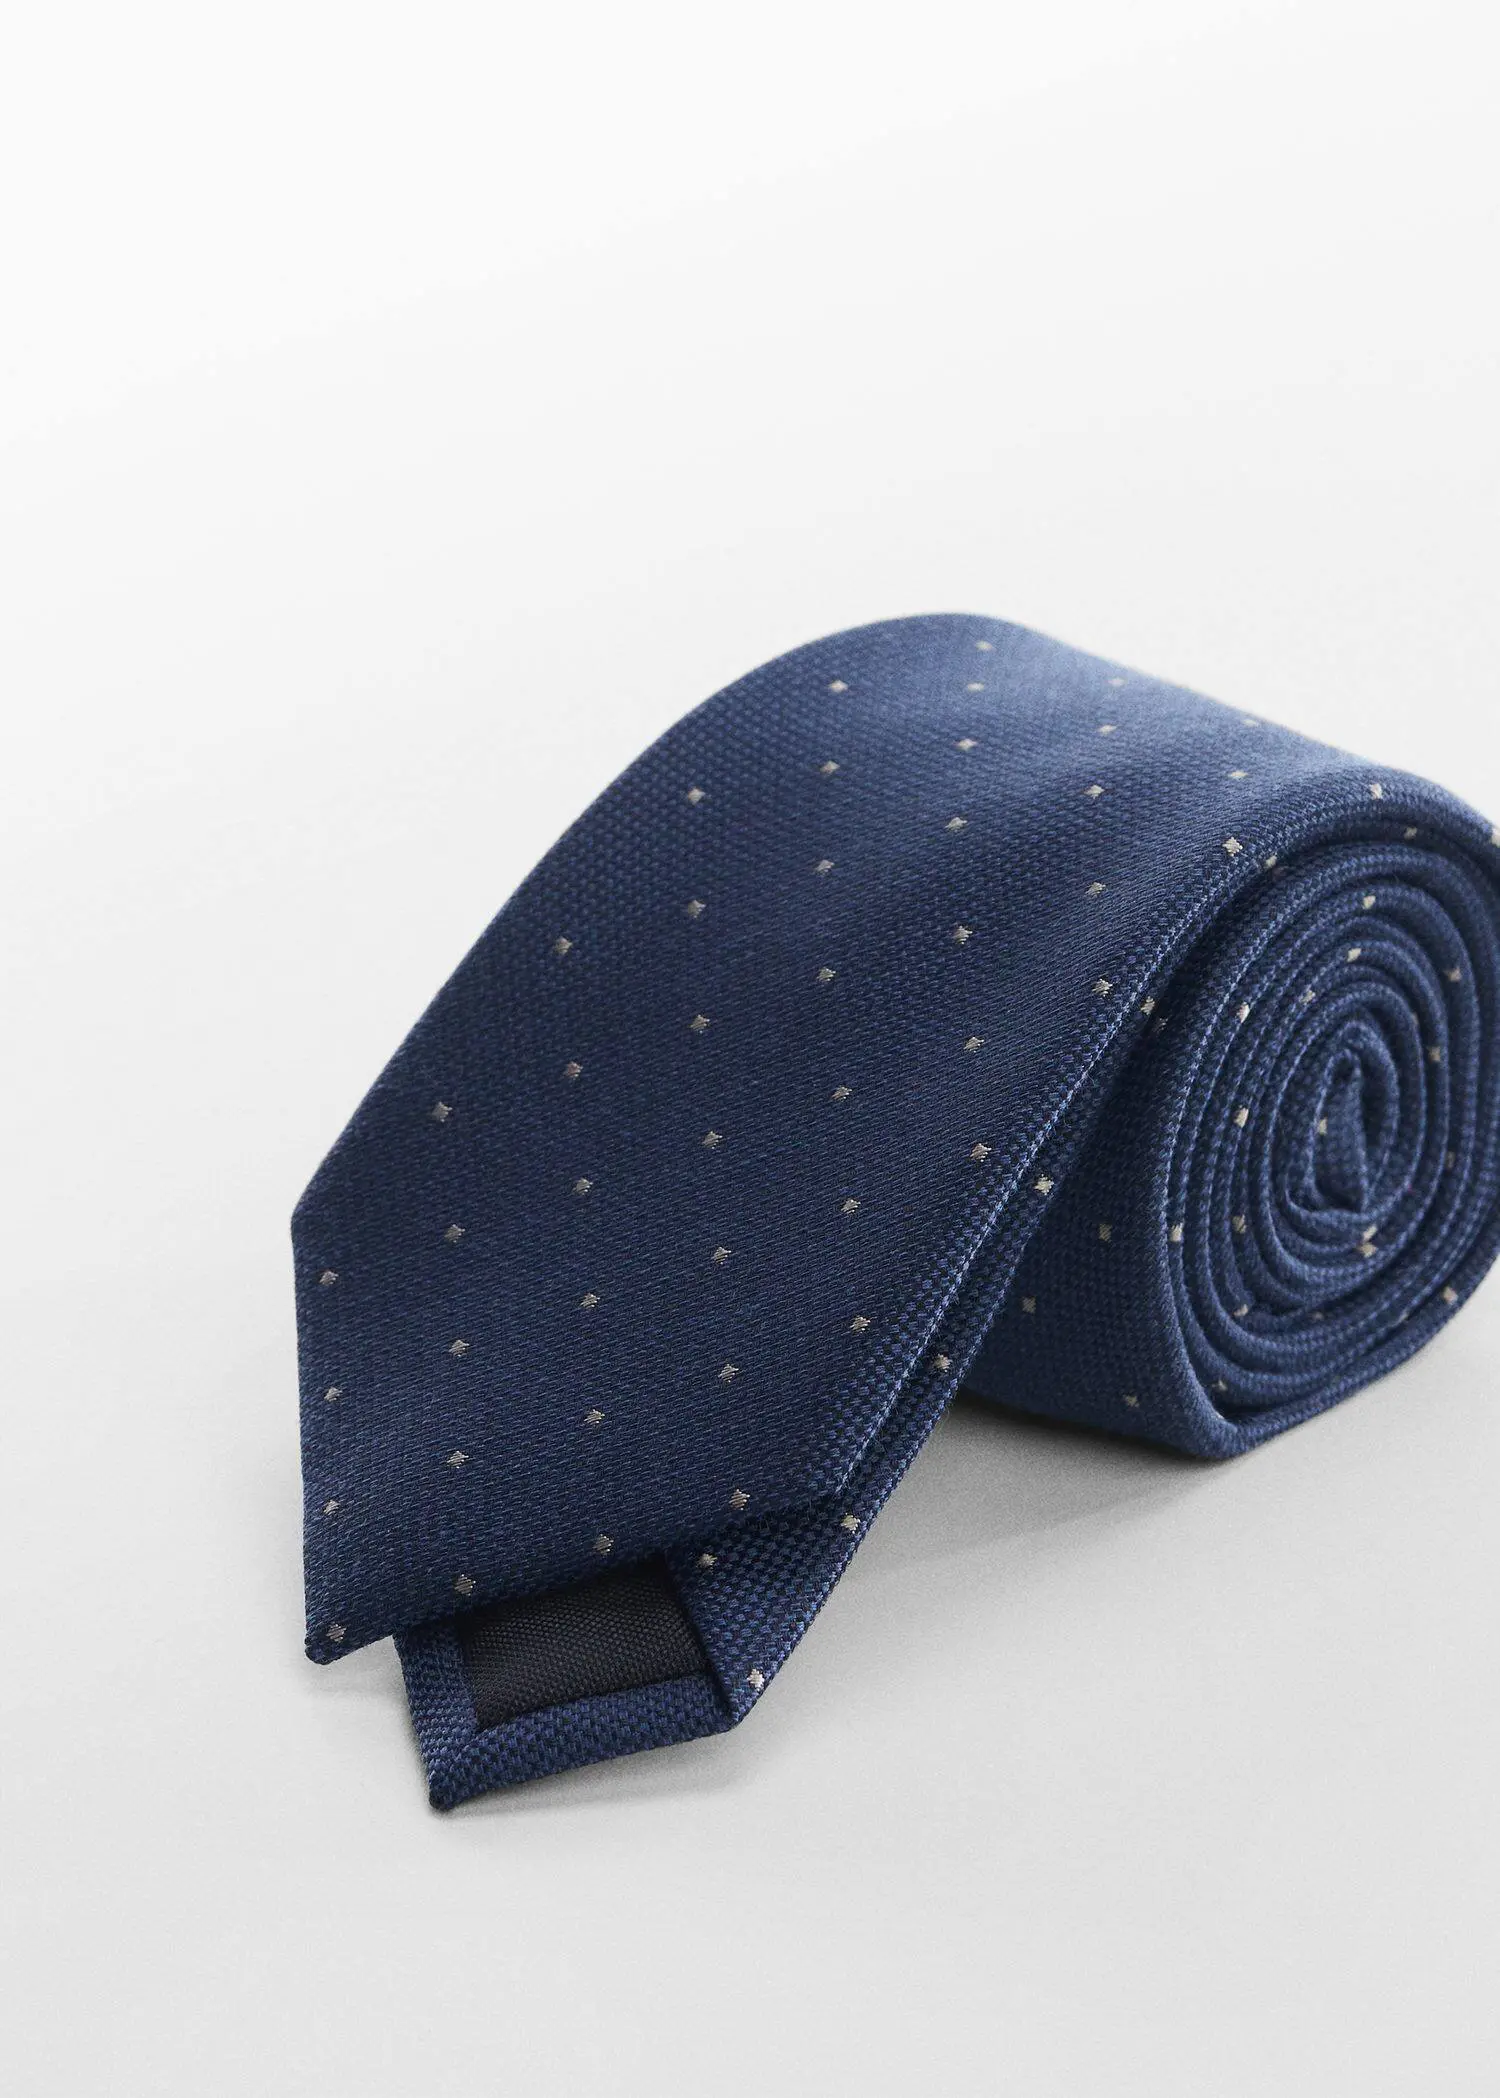 Mango Tie with micro polka-dot structure. a blue neck tie on top of a table. 